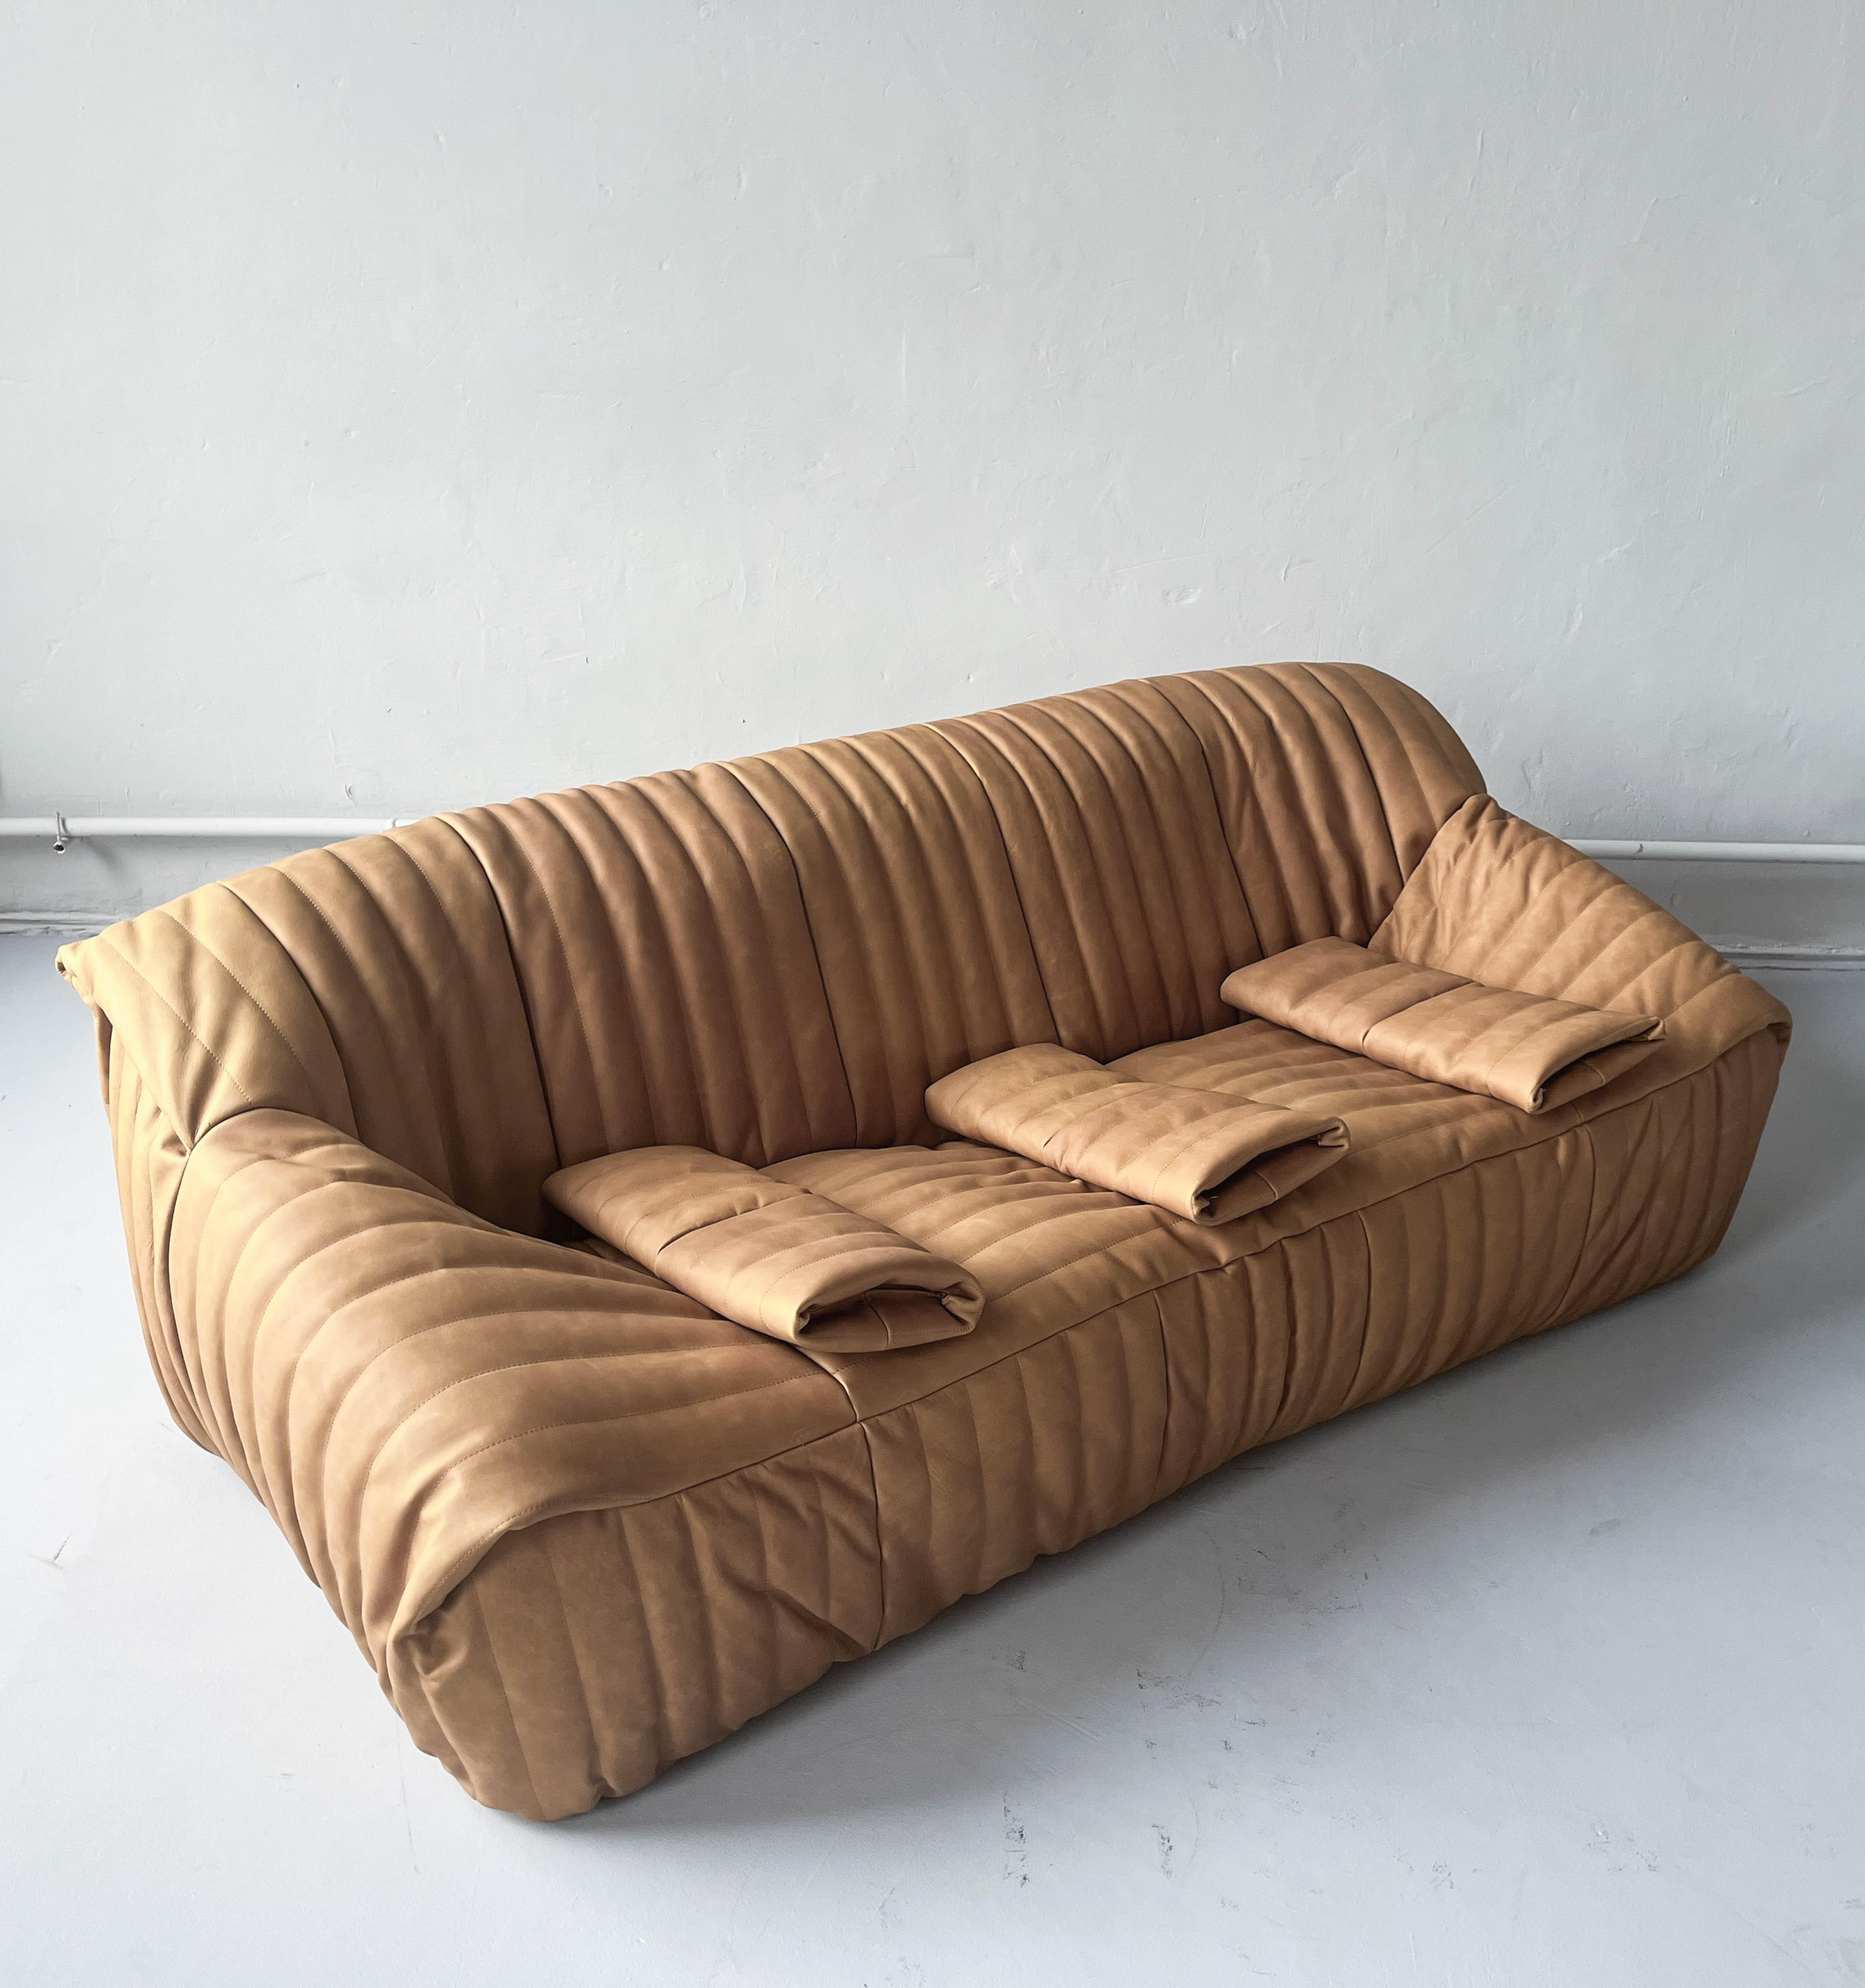  Sandra sofa  designed by Annie Hiéronimus for Cinna after she joined the Roset Bureau d’Etudes in 1976. 
 The inside of the sofa consists entirely of polyether foam and is, therefore, feather-light and above all very comfortable. 
3 seater sofa,